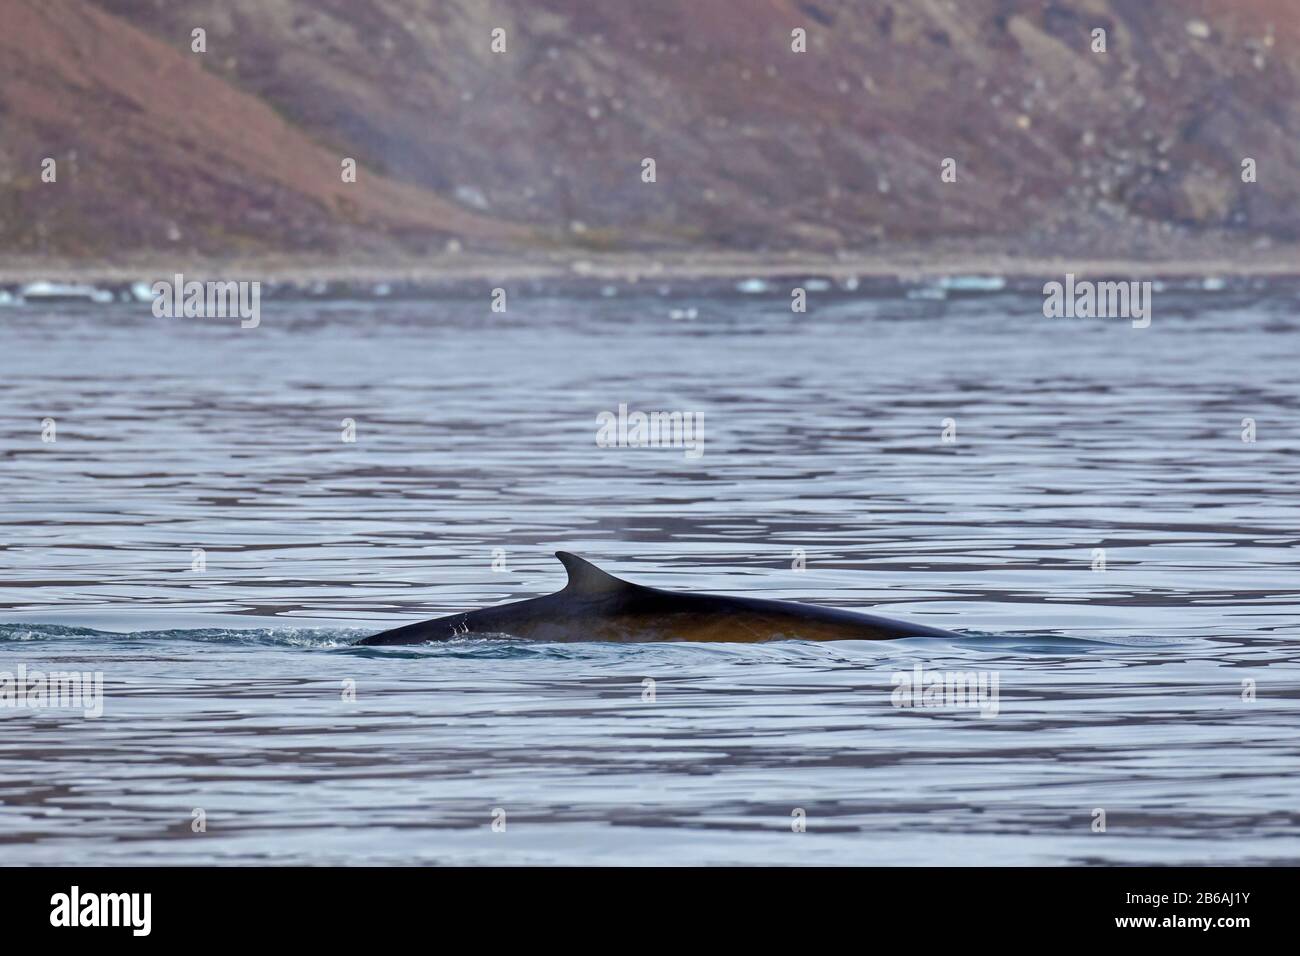 Fin whale / finback whale / common rorqual / herring whale / razorback whale (Balaenoptera physalus) showing dorsal fin while surfacing Stock Photo